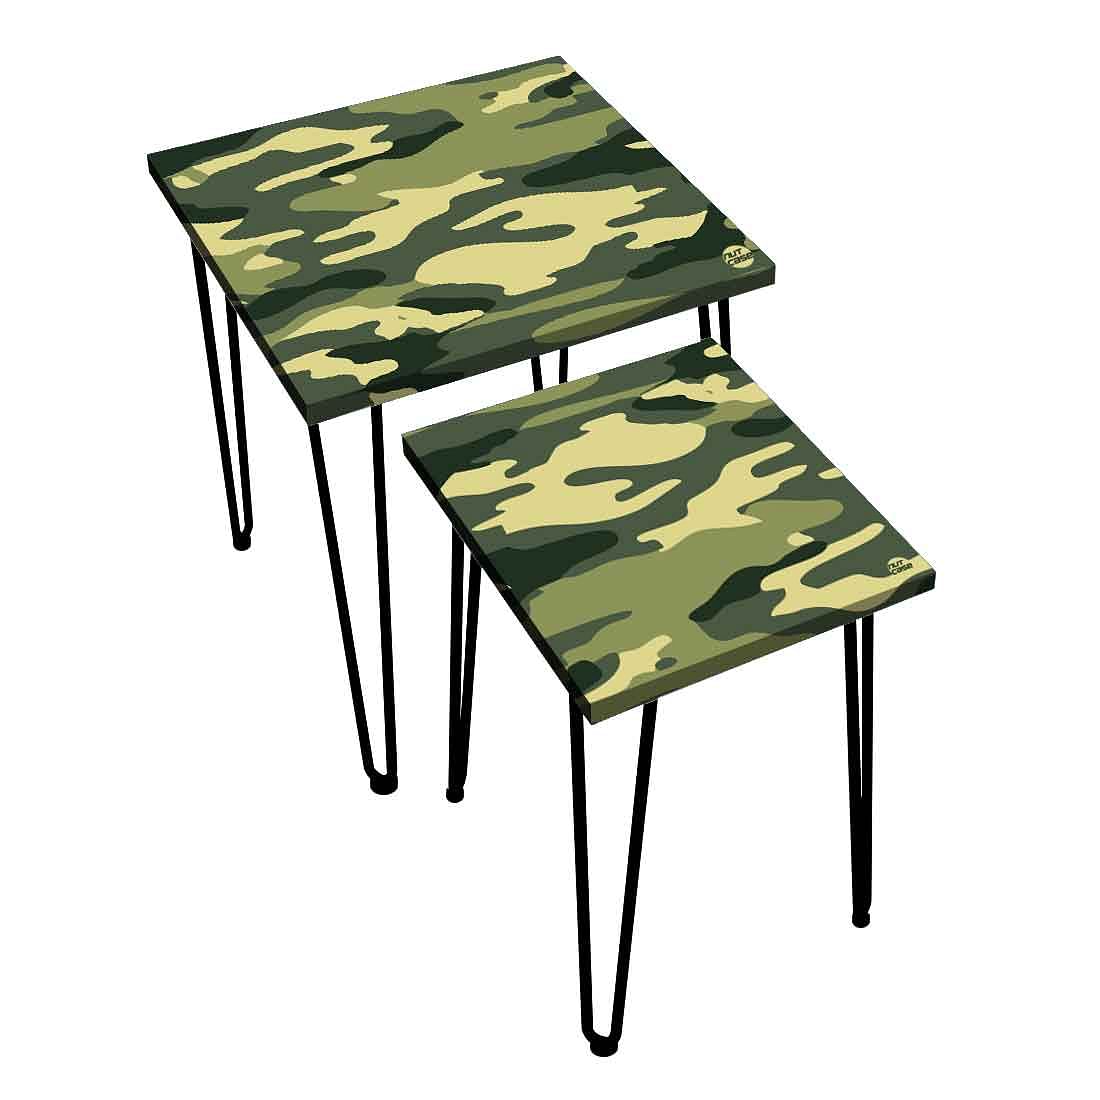 Hairpin Nesting Tables Set of 2 with Printed Top - Army Camouflage Nutcase